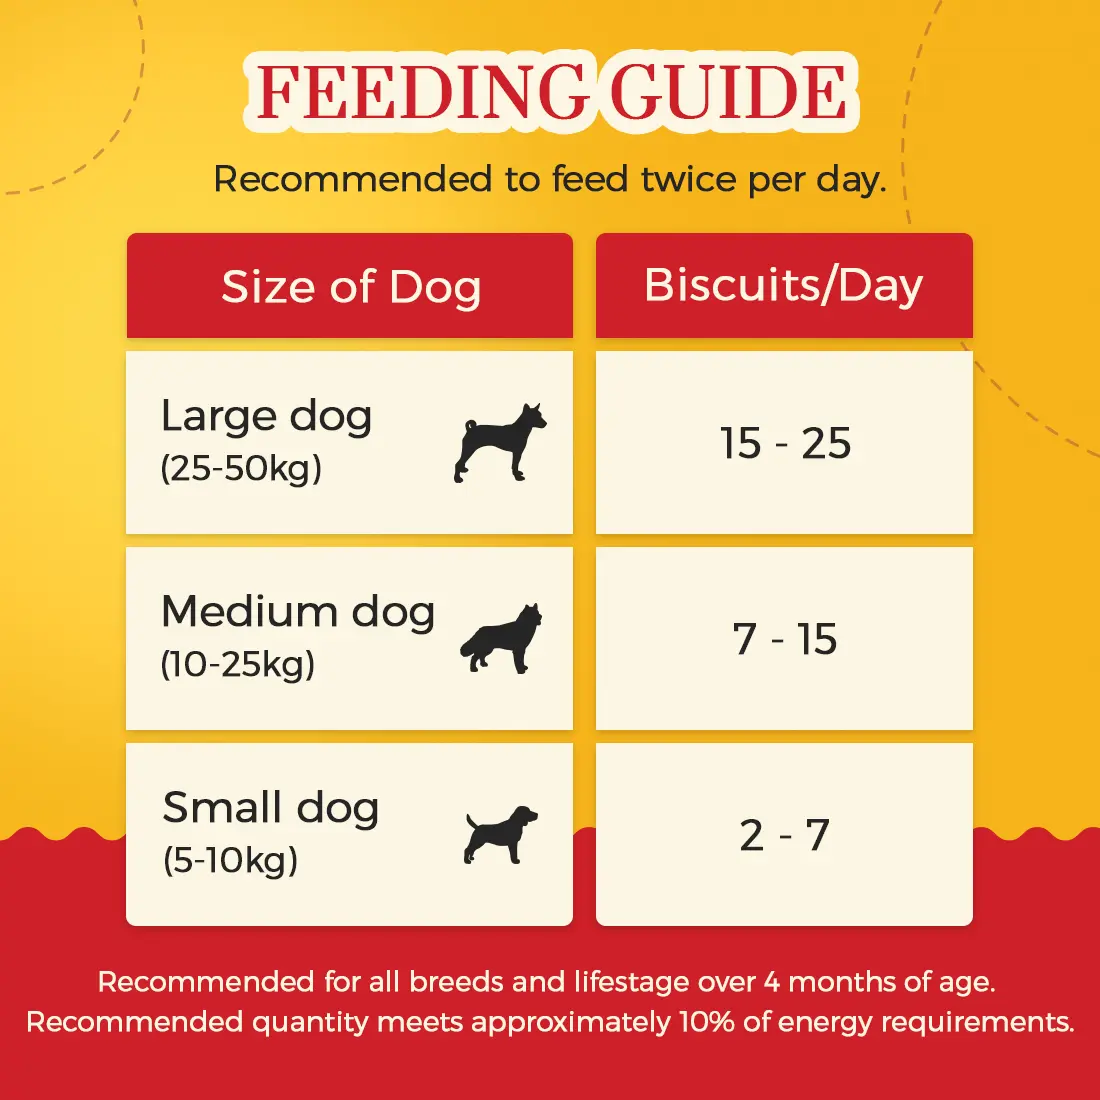 Feeding Guide - Carrot Cookies for Dogs